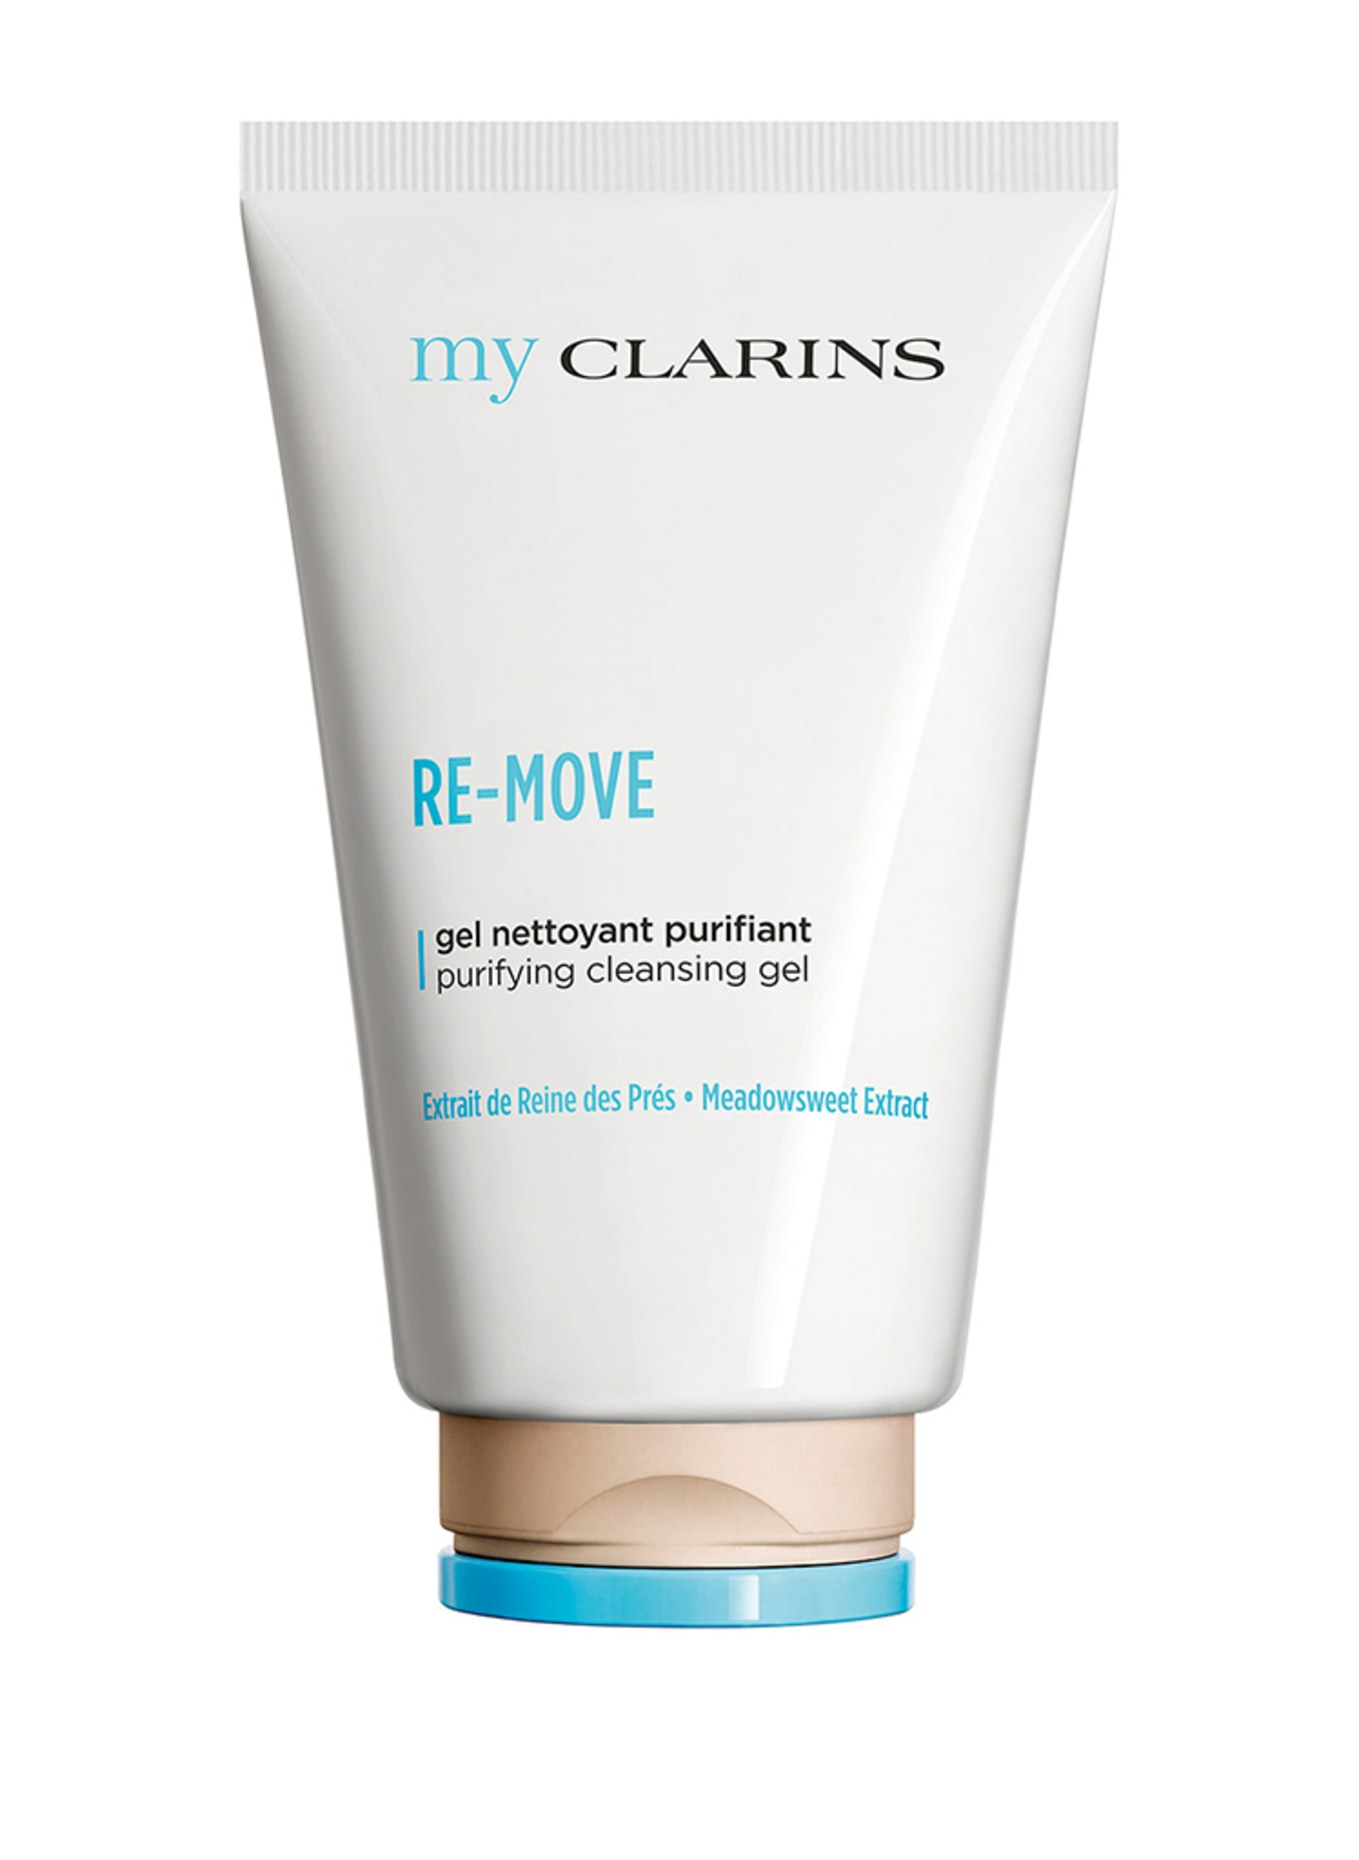 CLARINS RE-MOVE PURIFYING CLEANSING GEL (Bild 1)